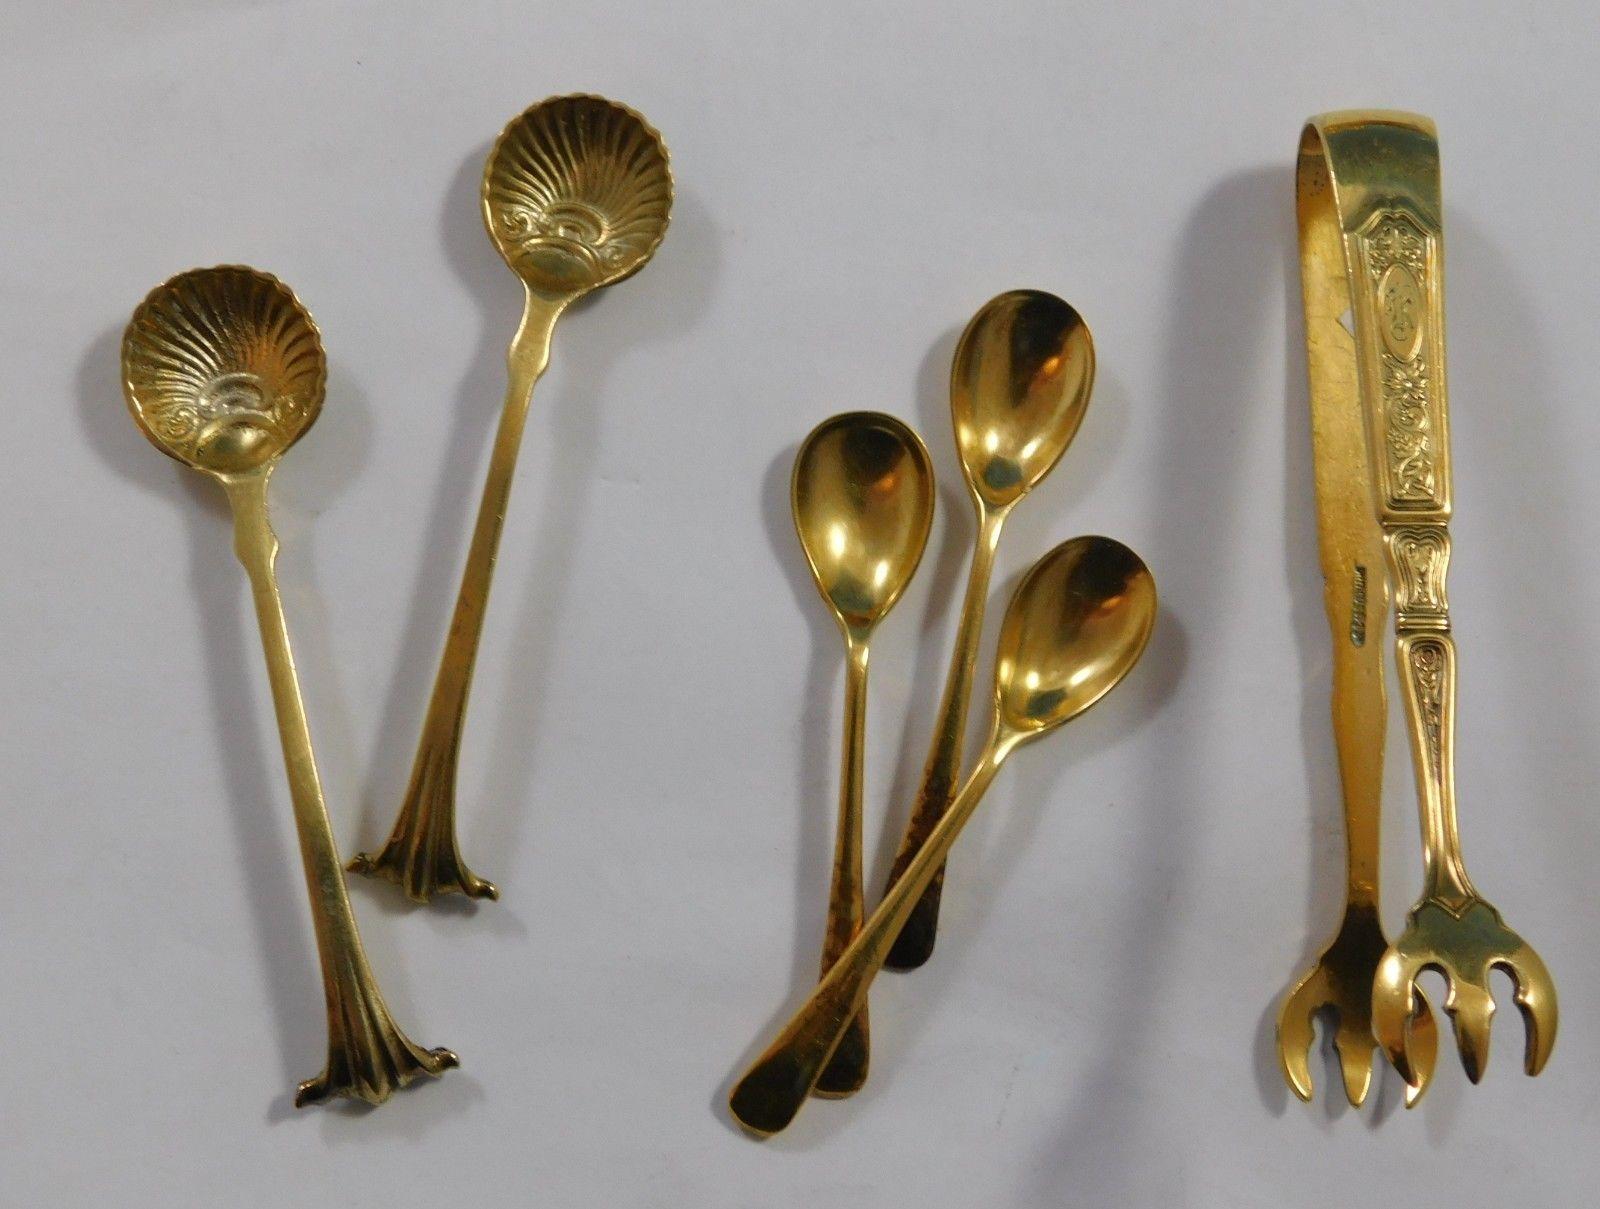 20th Century Tiffany & Co. Sterling Silver Table Set of 41 Pieces Vermeil with Monogram 